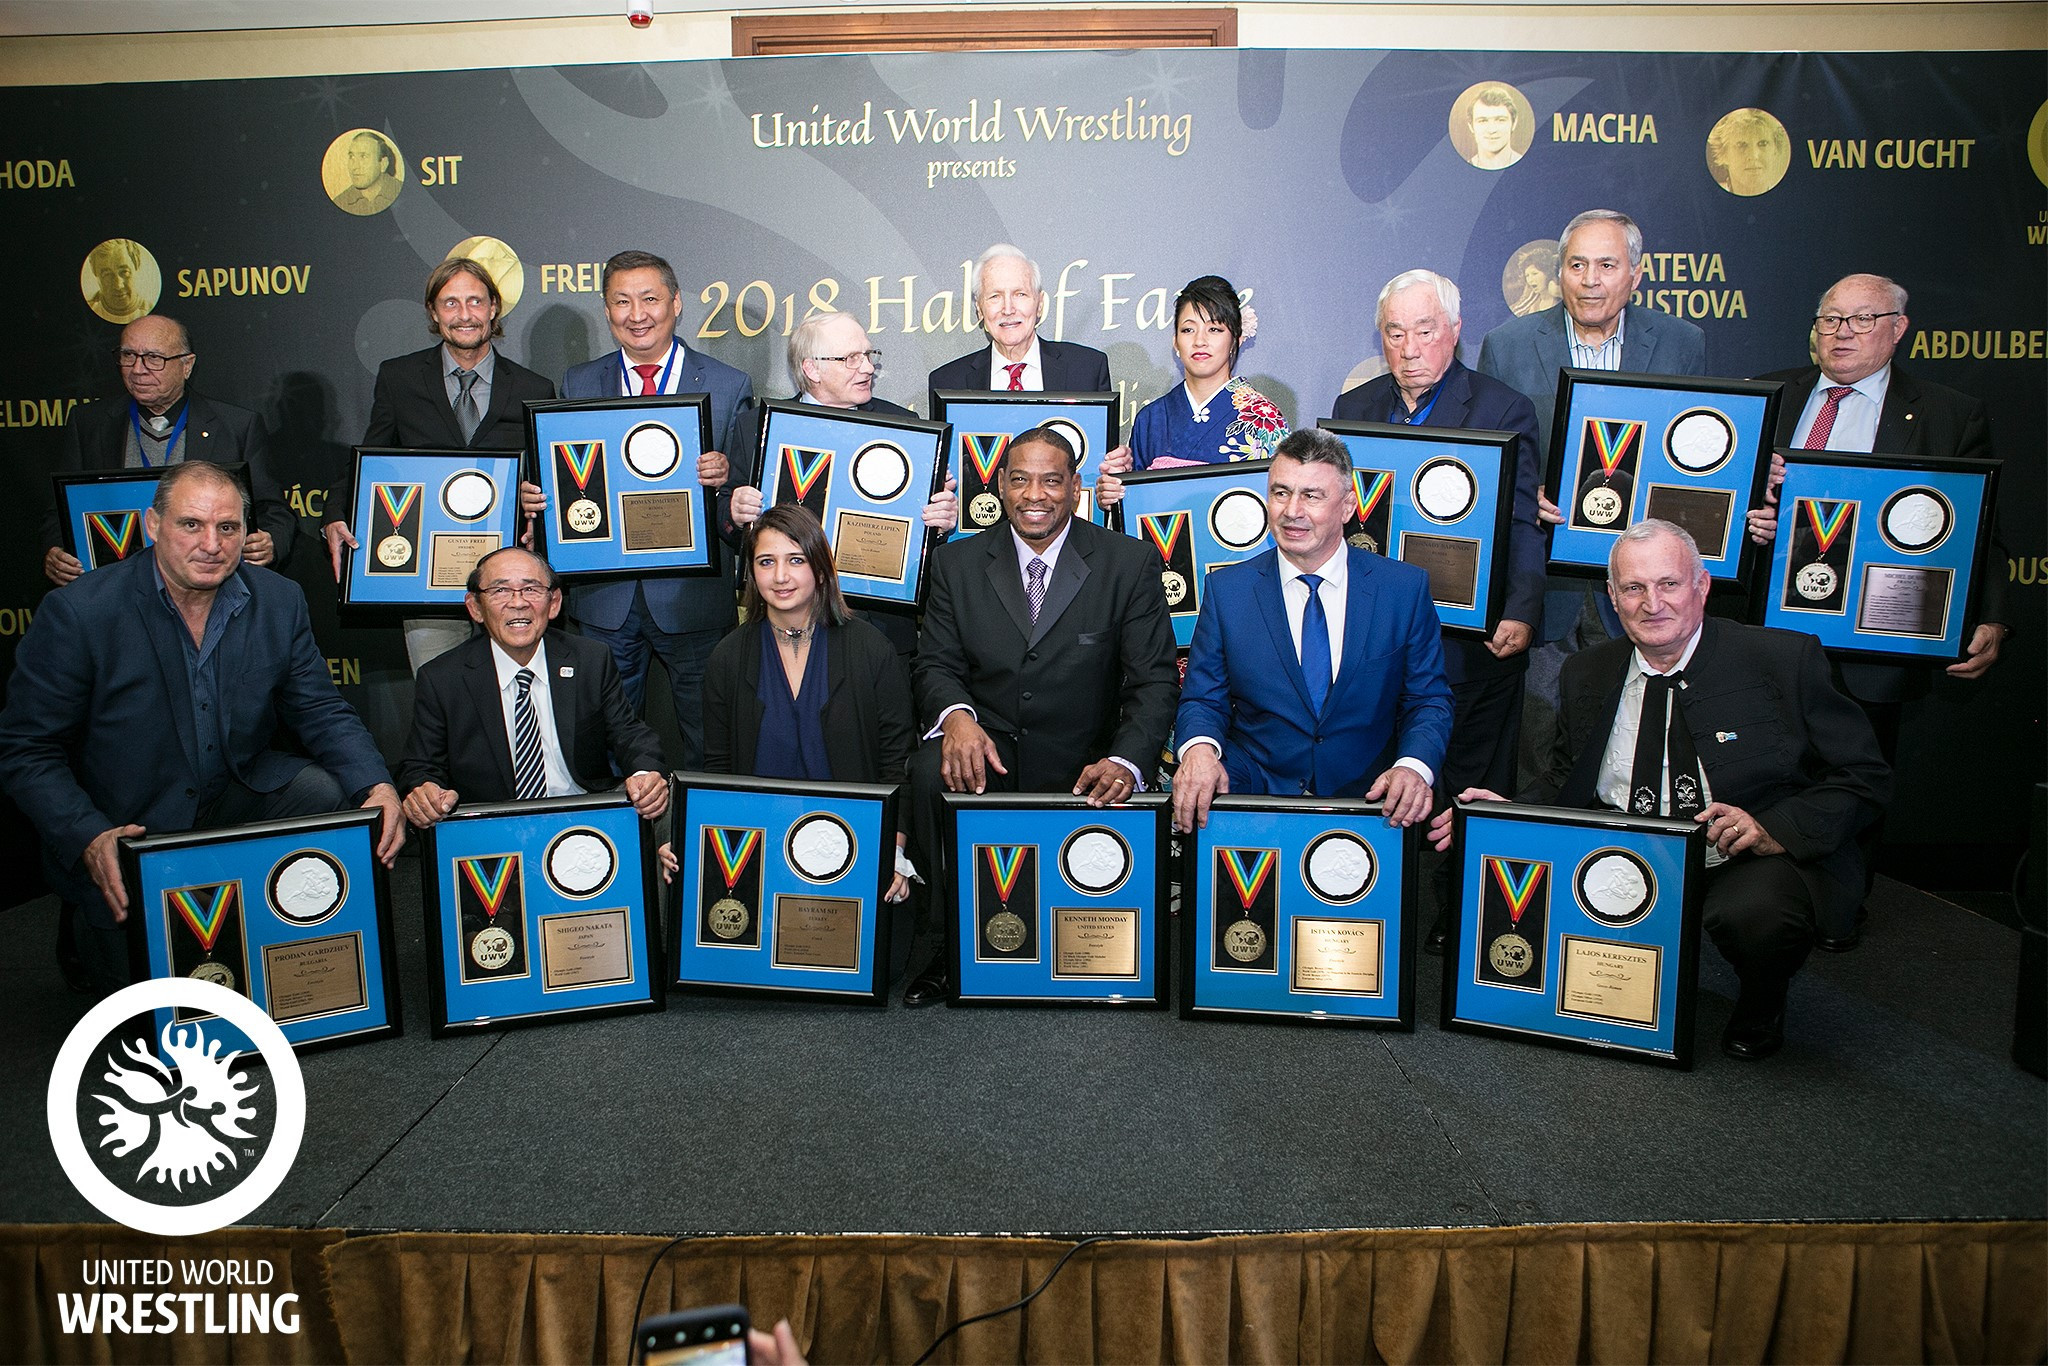 In all more than a dozen new members were inducted into the Hall of Fame, including world and Olympic champions ©UWW